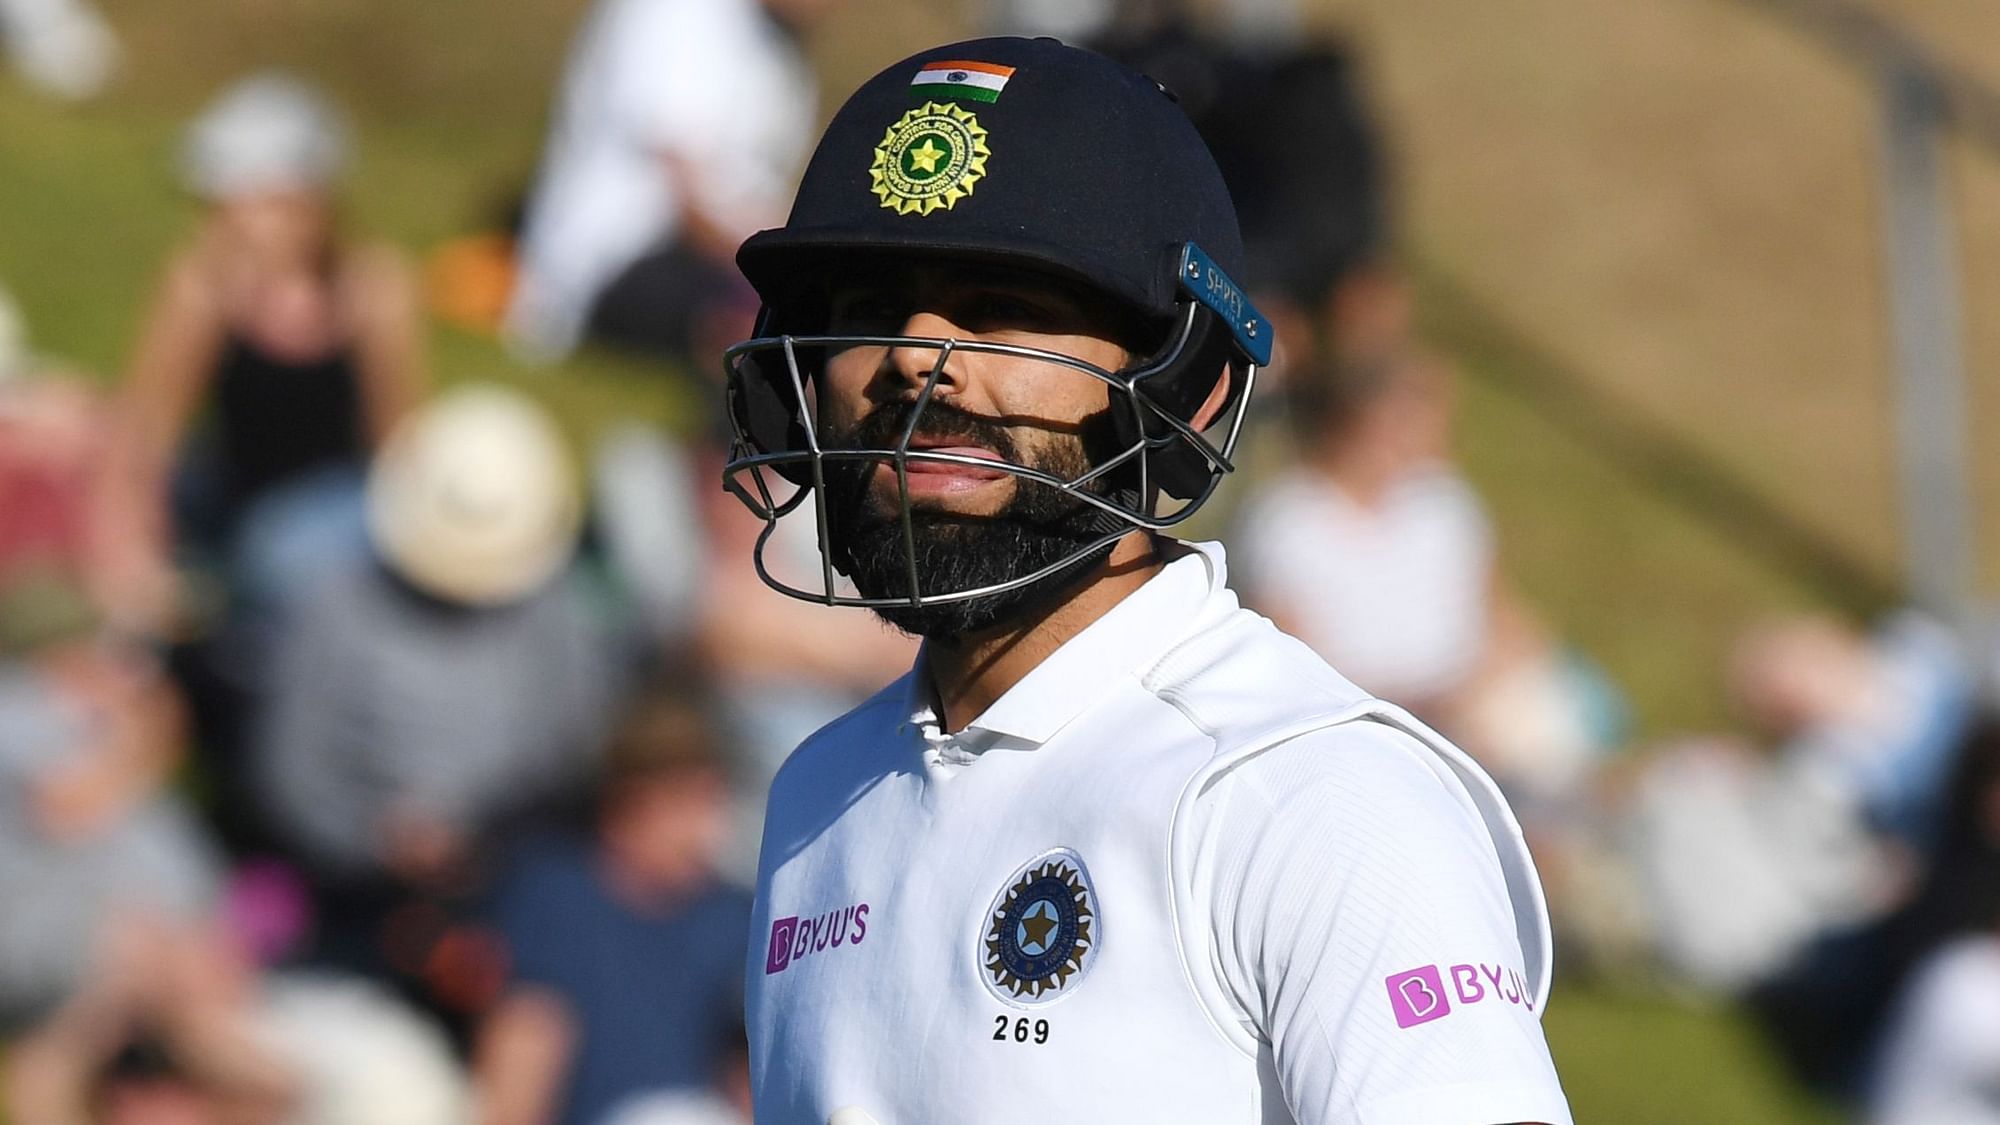 Live updates from India vs New Zealand 1st Test Day 3 at Basin Reserve in Wellington.